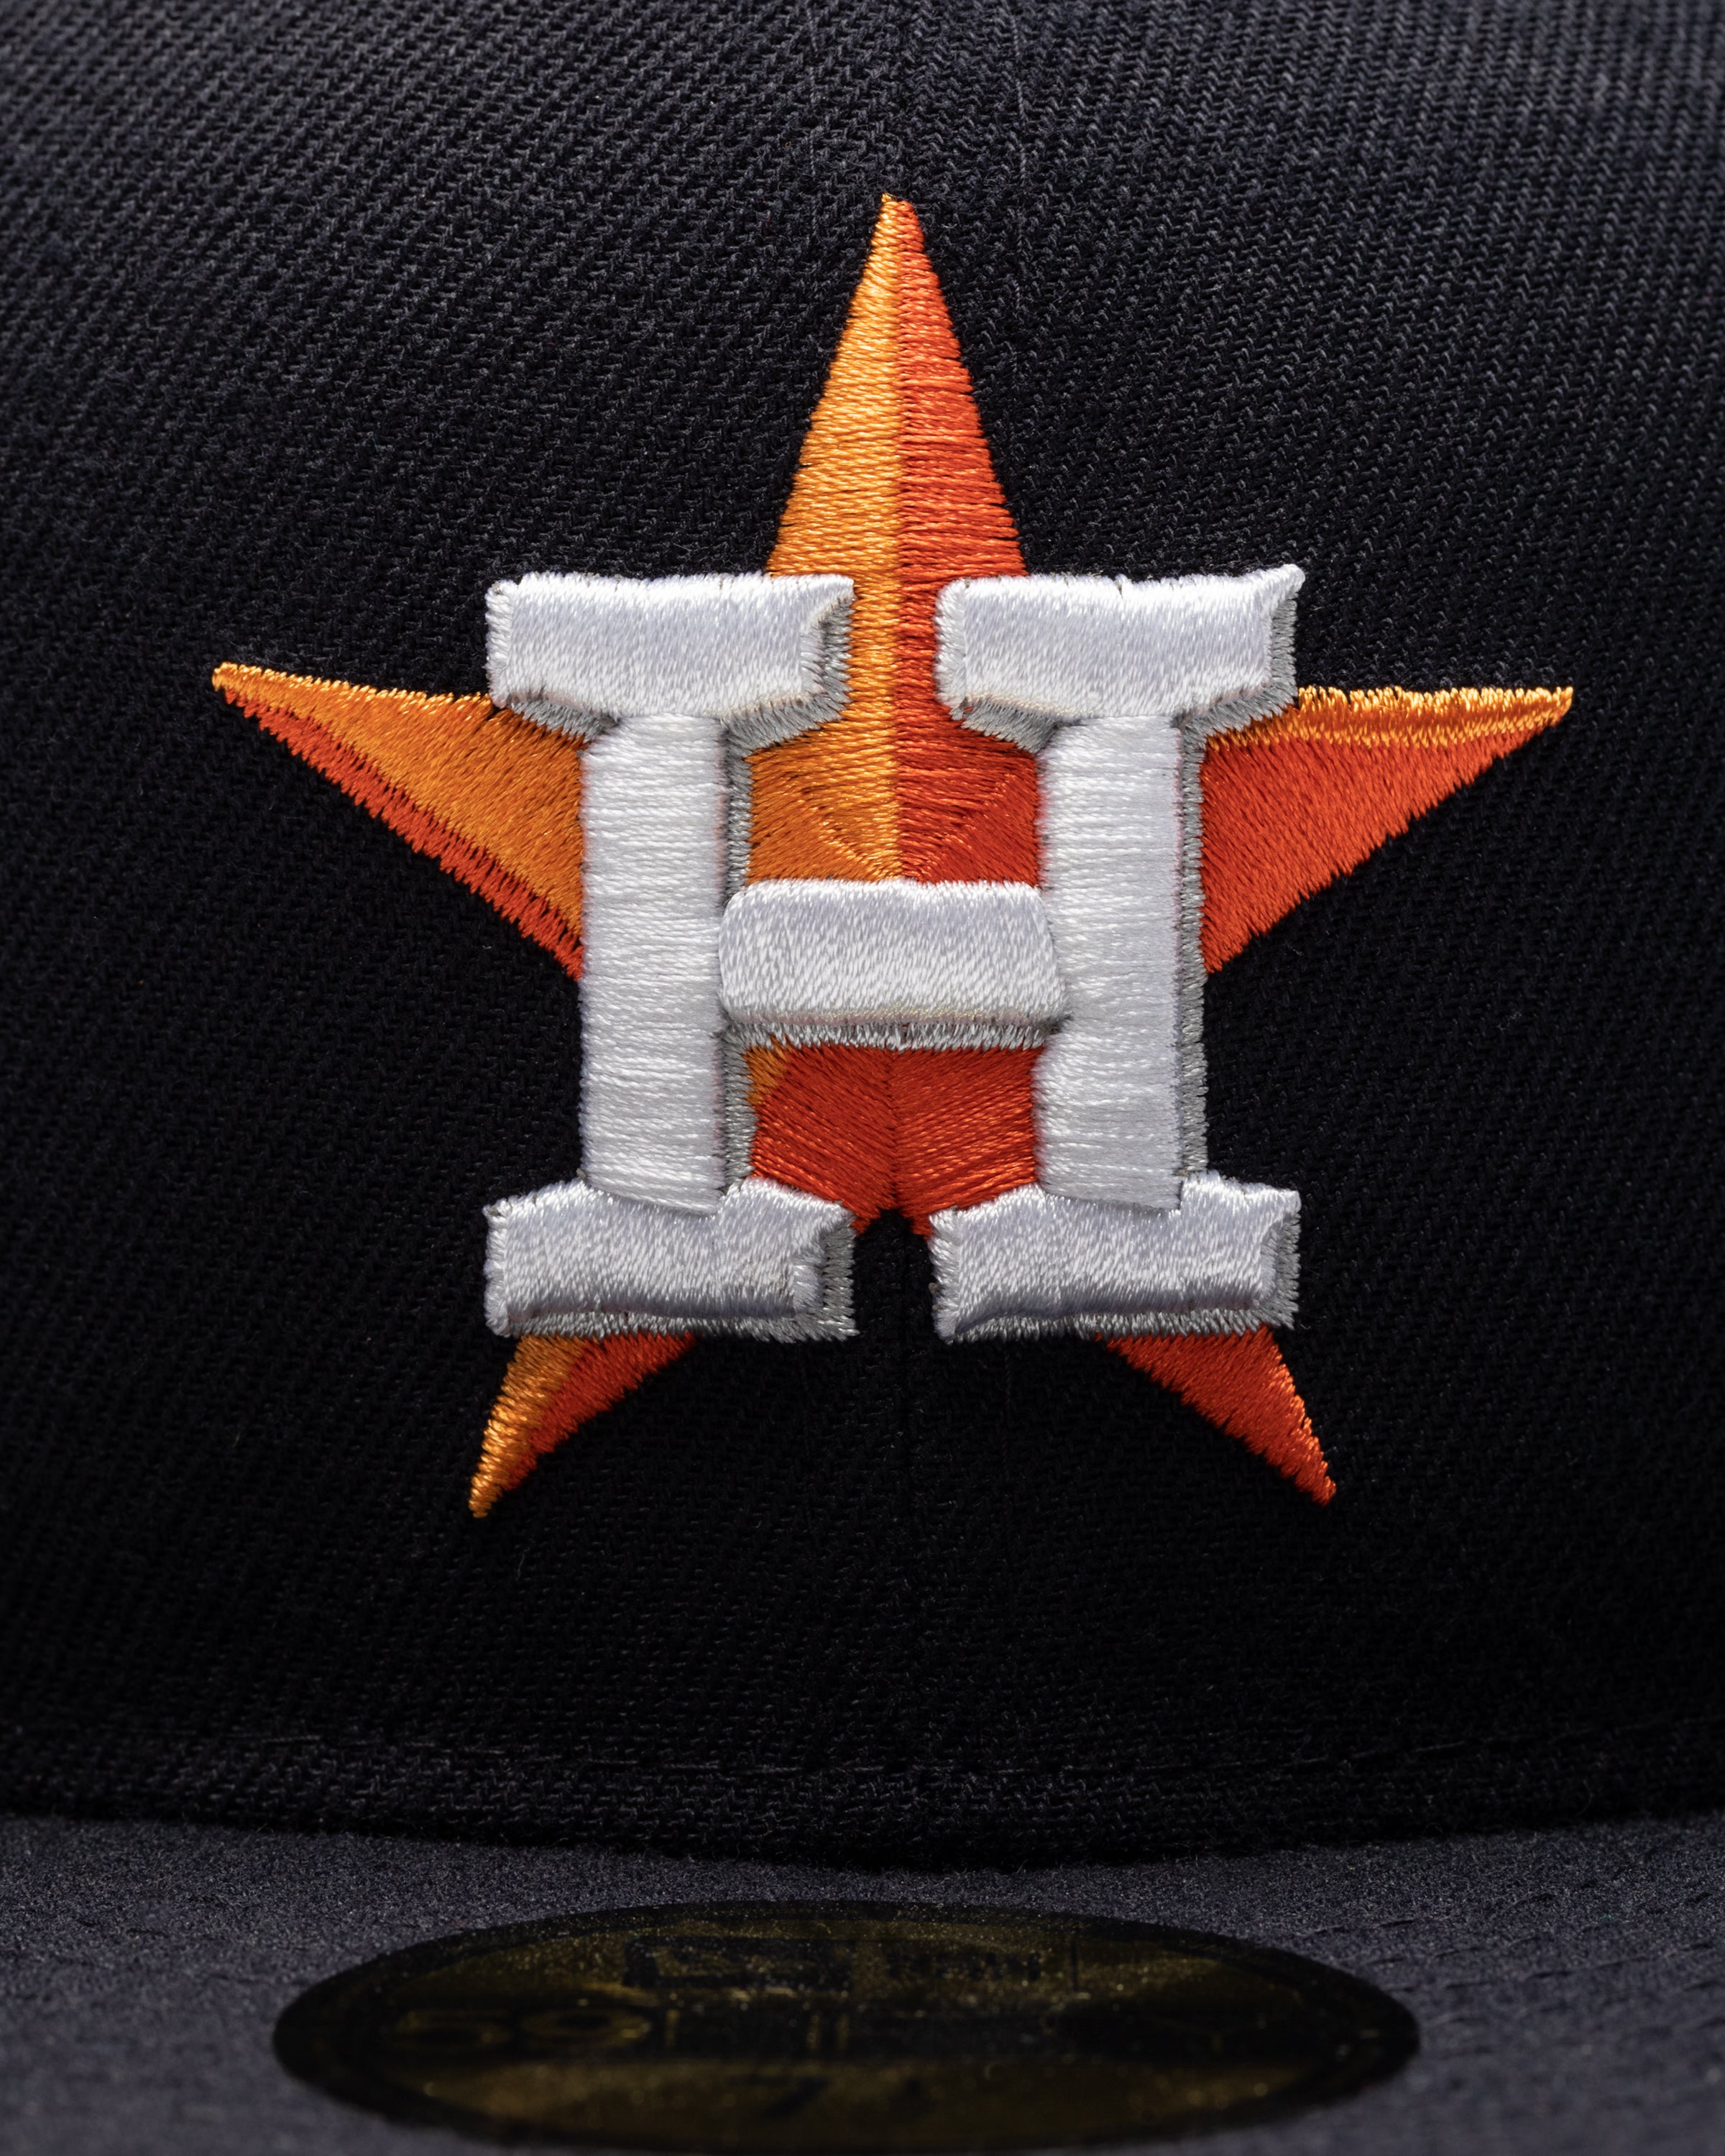 UNDEFEATED X NE X MLB FITTED - HOUSTON ASTROS